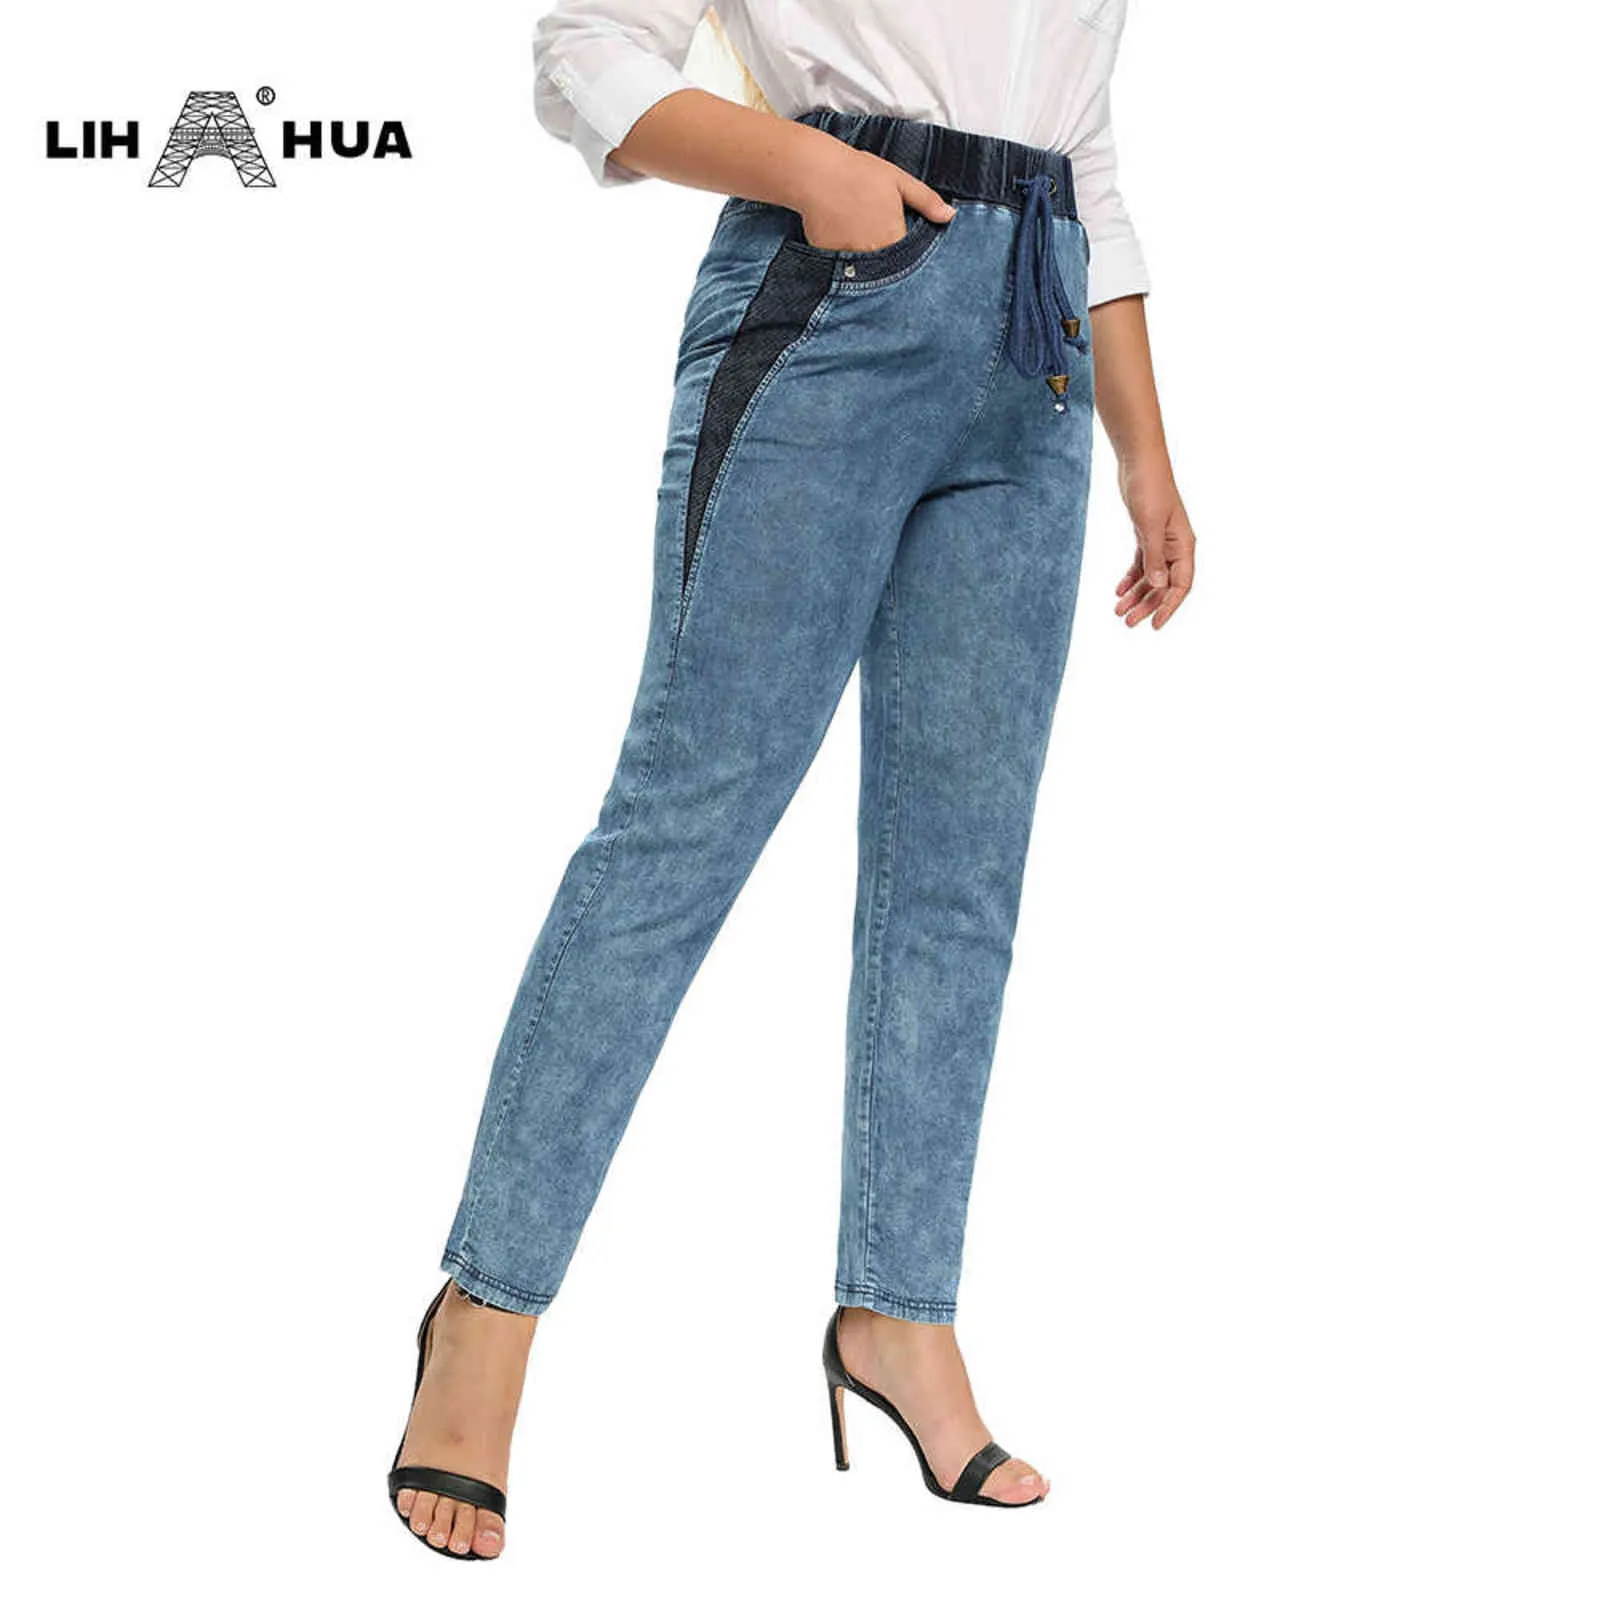 LIH HUA Women's Plus Size Casual Jeans High Flexibility Cotton Woven Thin Denim Trousers Softener with Elastic Waist 211129